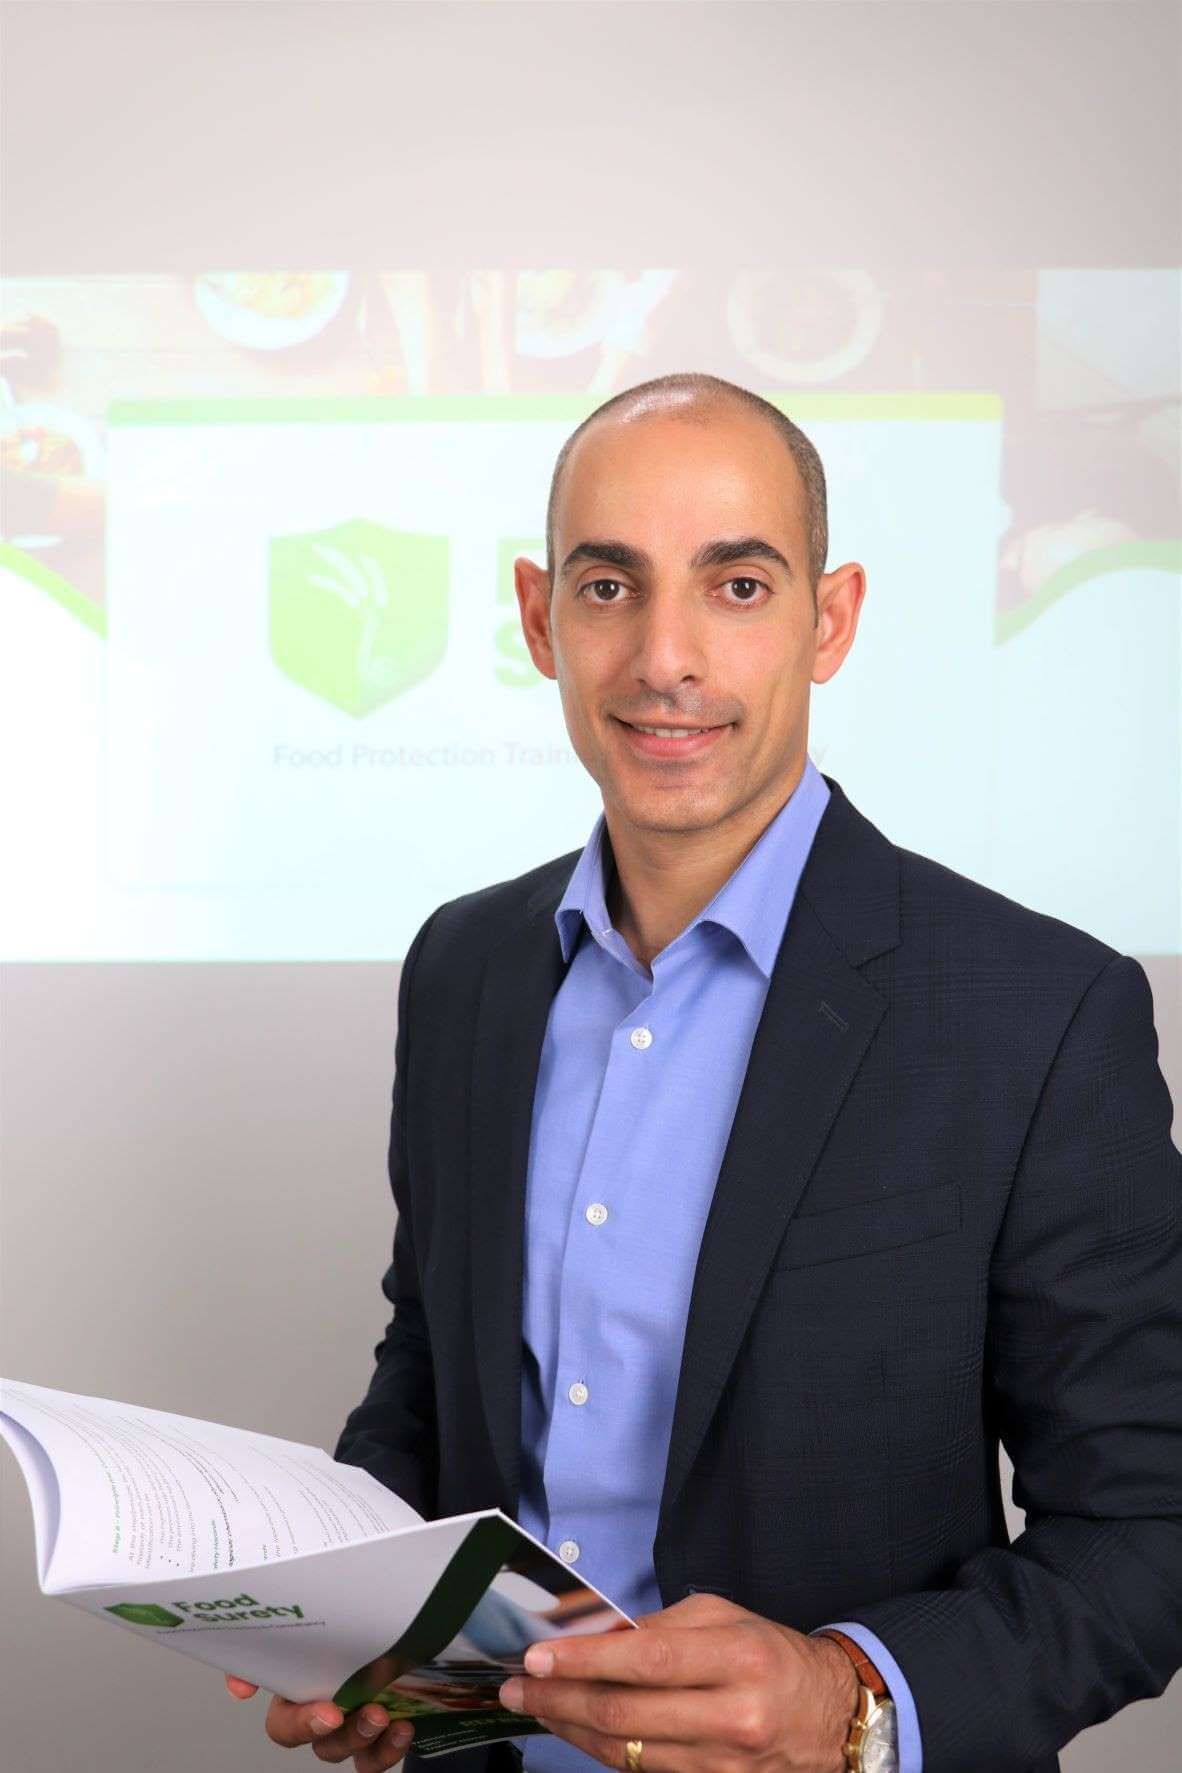 Food Defence Trainer - Ray Haddad- featured in the food defese awareness elearning talking about intentional adulteration 